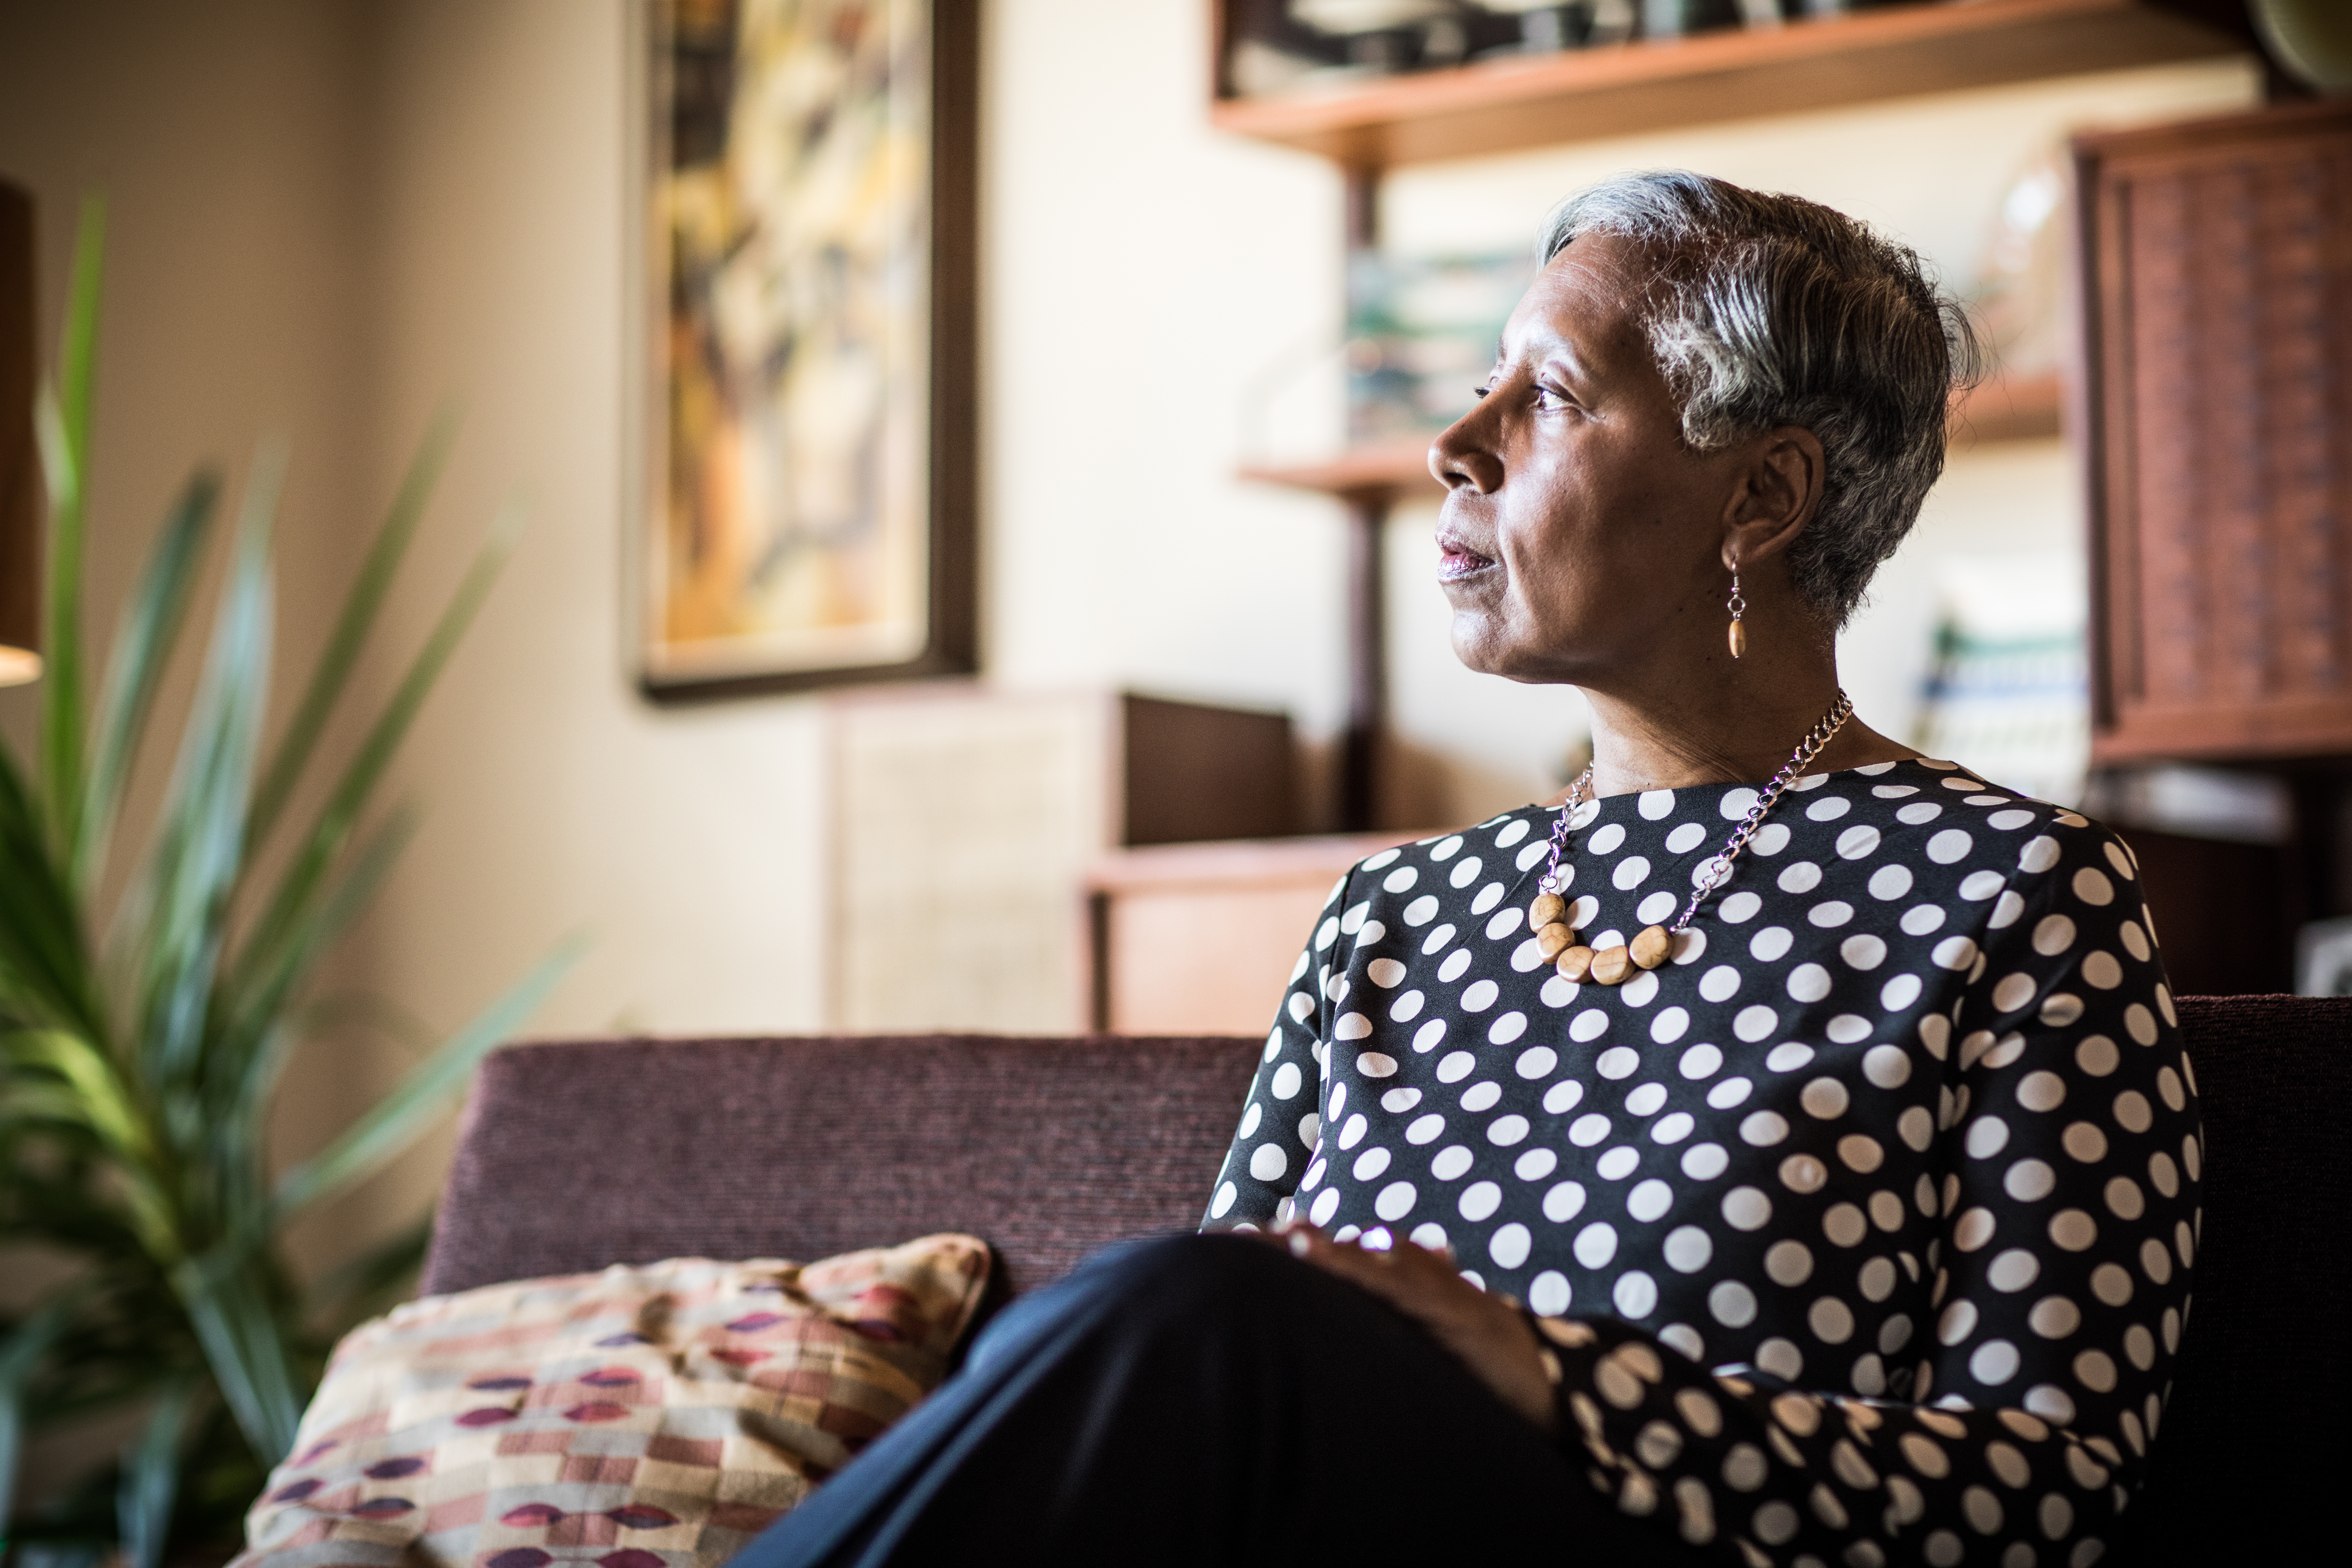 Portrait of woman (60yrs) sitting on couch at home | Source: Getty Images